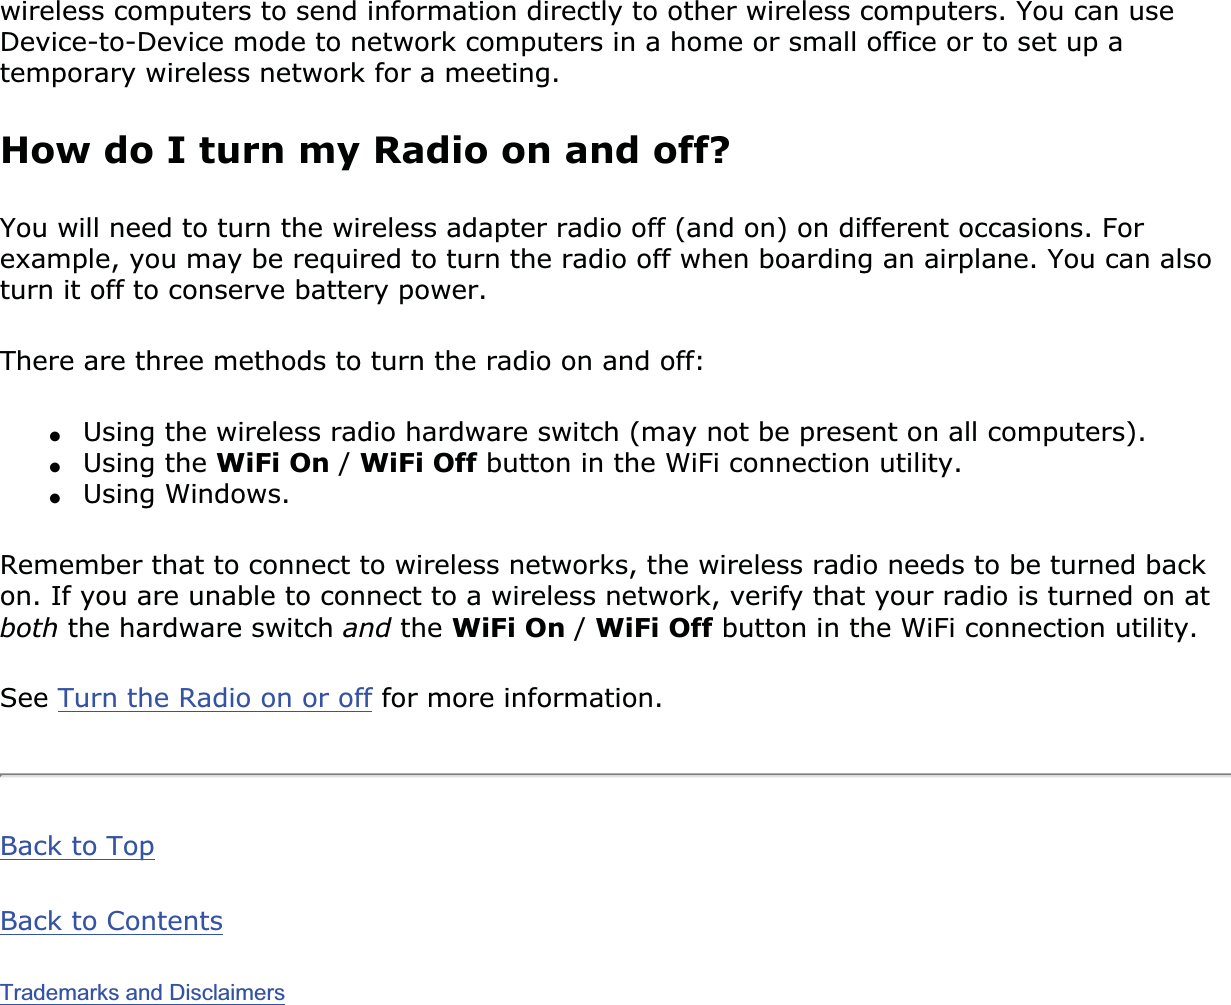 wireless computers to send information directly to other wireless computers. You can use Device-to-Device mode to network computers in a home or small office or to set up a temporary wireless network for a meeting. How do I turn my Radio on and off?You will need to turn the wireless adapter radio off (and on) on different occasions. For example, you may be required to turn the radio off when boarding an airplane. You can also turn it off to conserve battery power. There are three methods to turn the radio on and off:●Using the wireless radio hardware switch (may not be present on all computers). ●Using the WiFi On /WiFi Off button in the WiFi connection utility.●Using Windows.Remember that to connect to wireless networks, the wireless radio needs to be turned back on. If you are unable to connect to a wireless network, verify that your radio is turned on at both the hardware switch and the WiFi On /WiFi Off button in the WiFi connection utility.See Turn the Radio on or off for more information.Back to TopBack to ContentsTrademarks and Disclaimers